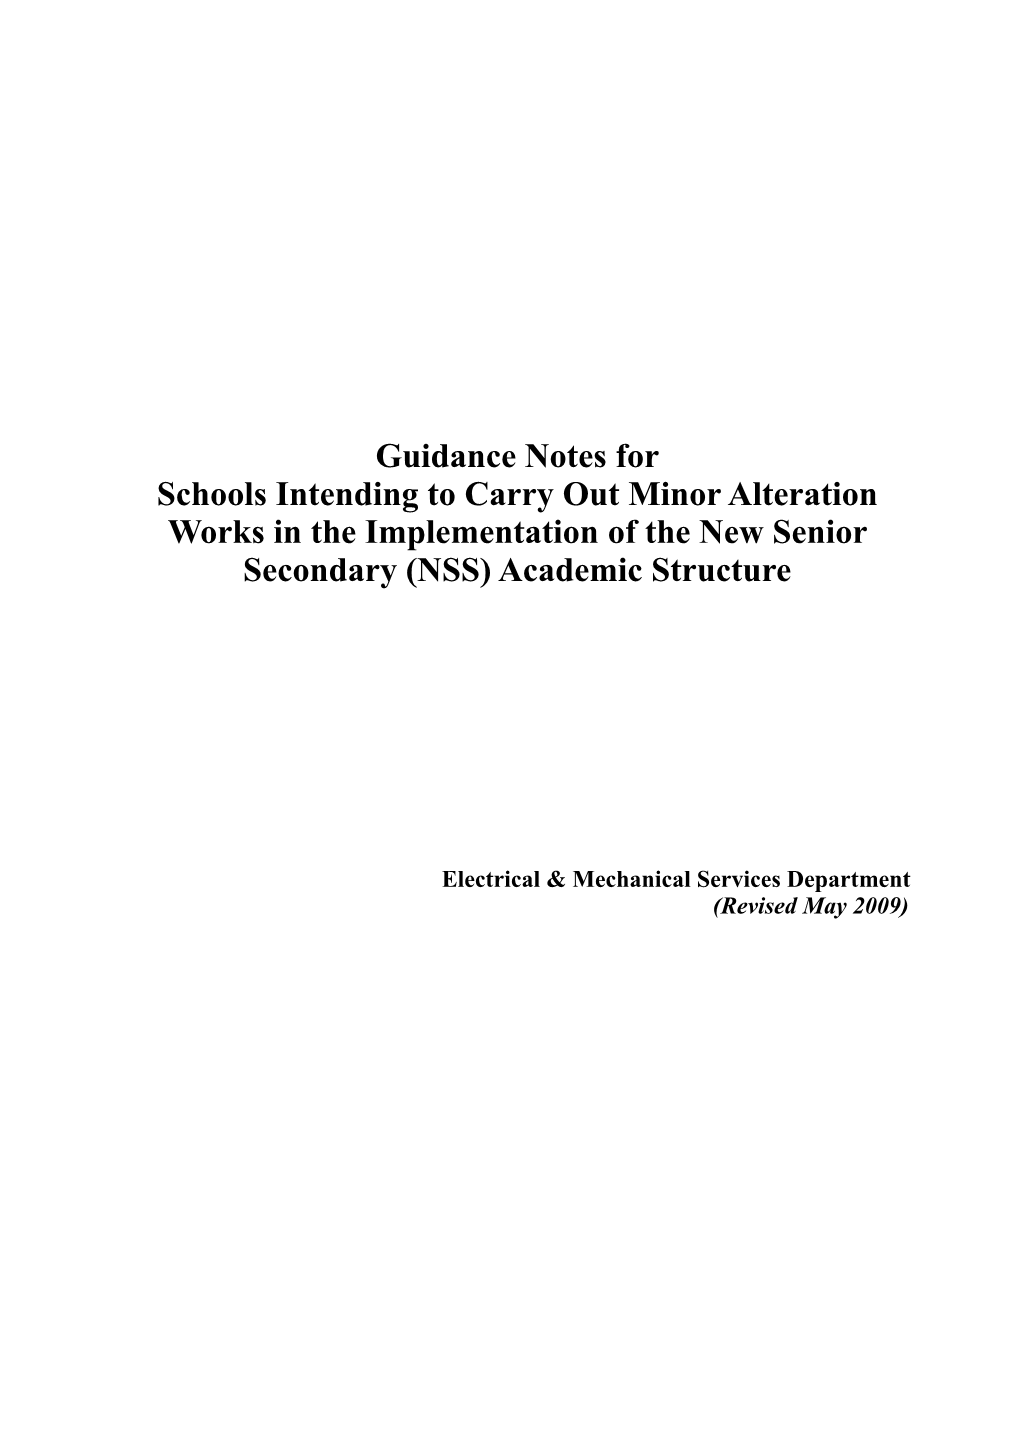 Guidance Notes Forschools Intendingto Carry out Minor Alteration Works